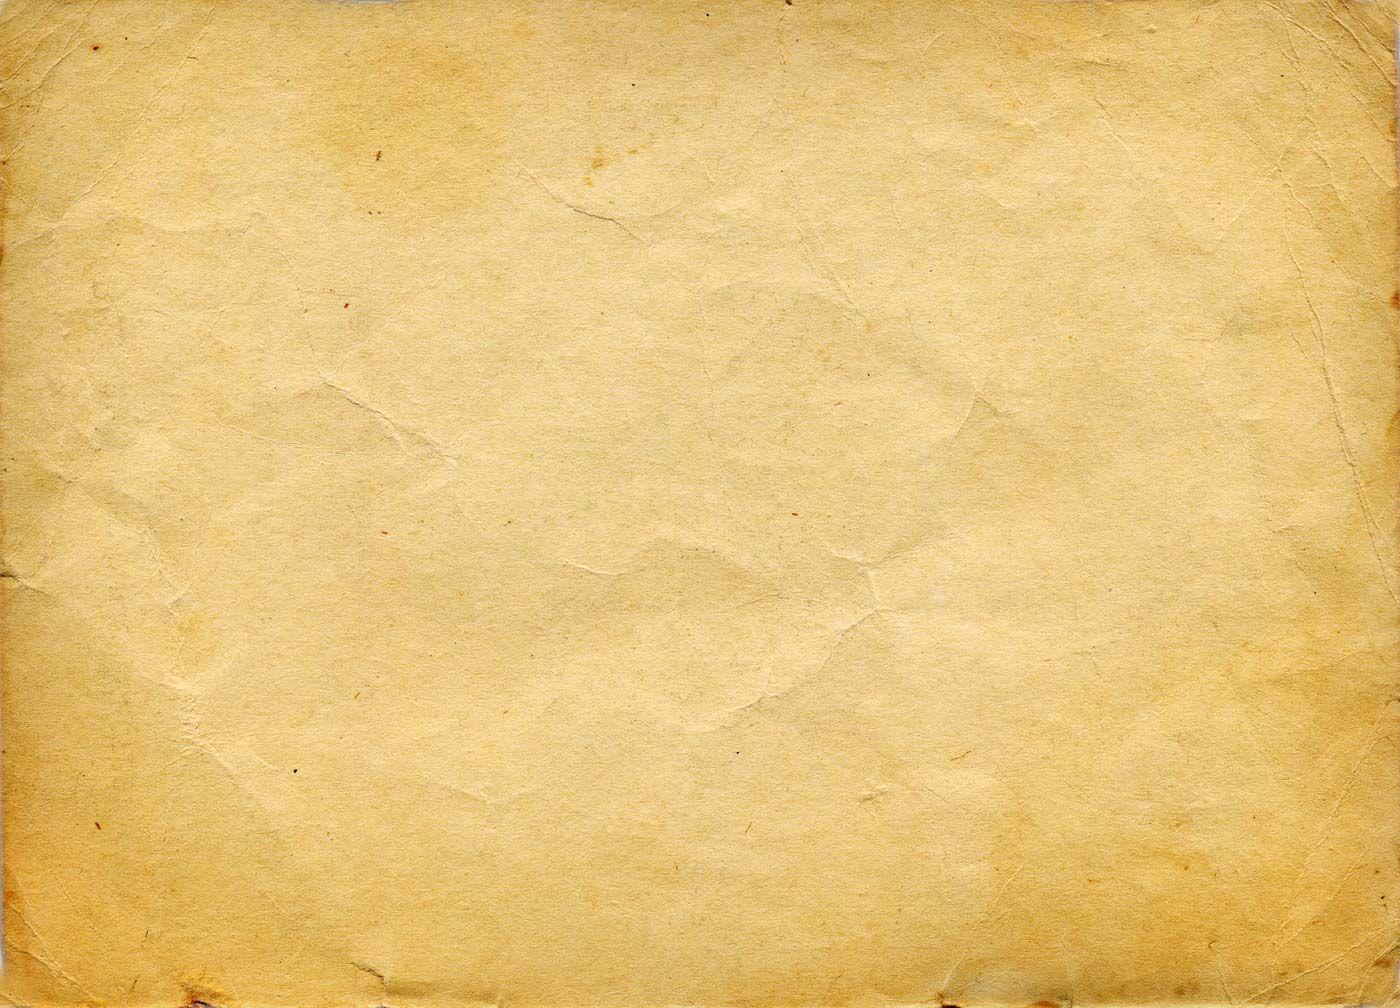 Paper PowerPoint background. Available in 1400x this